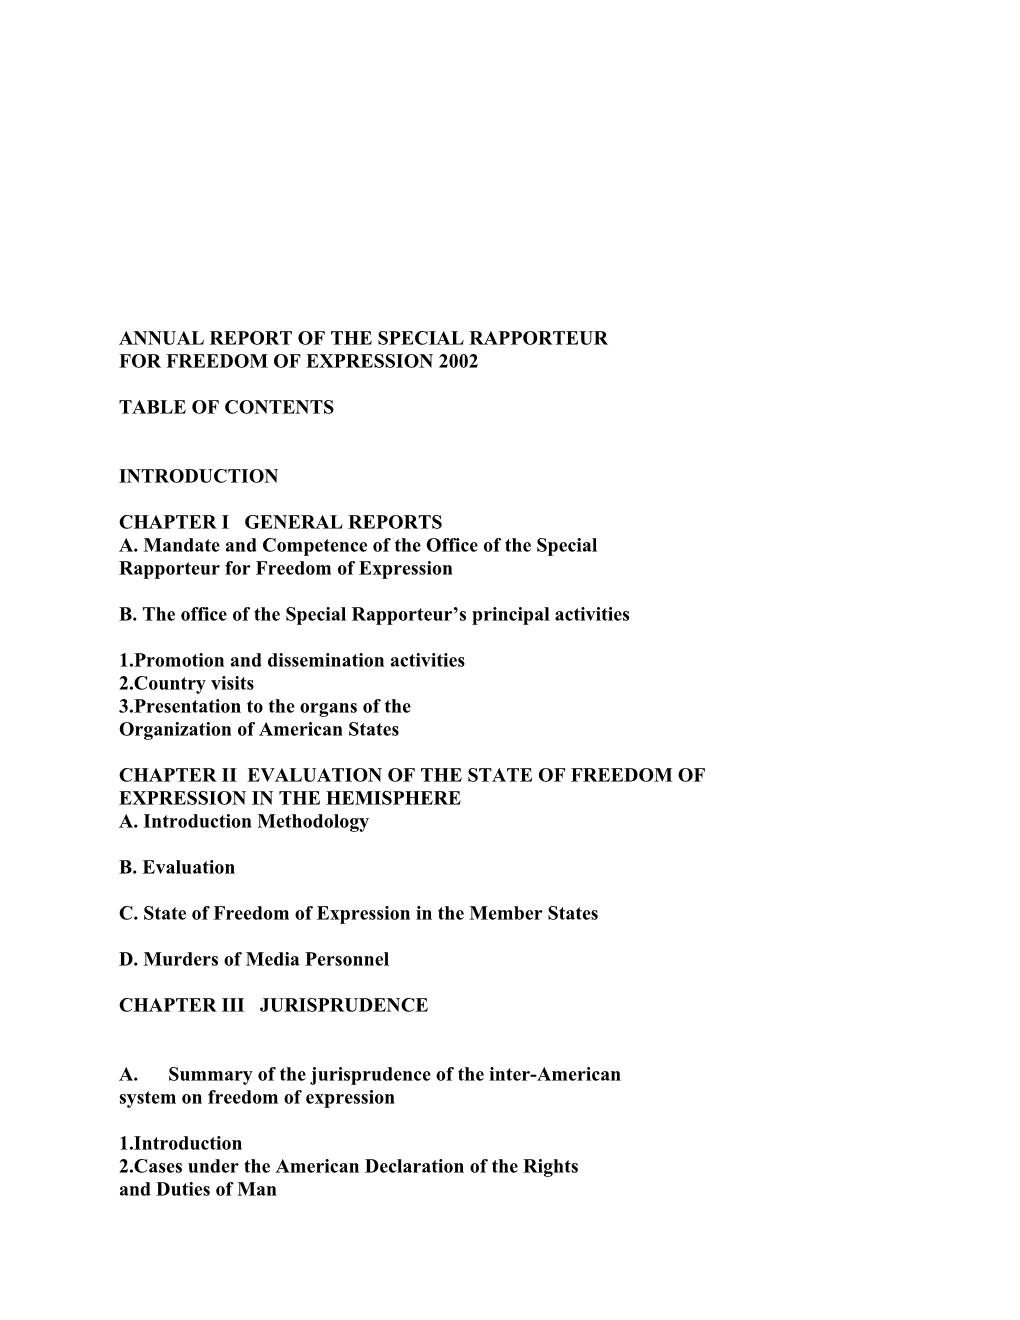 Annual Report of the Special Rapporteur